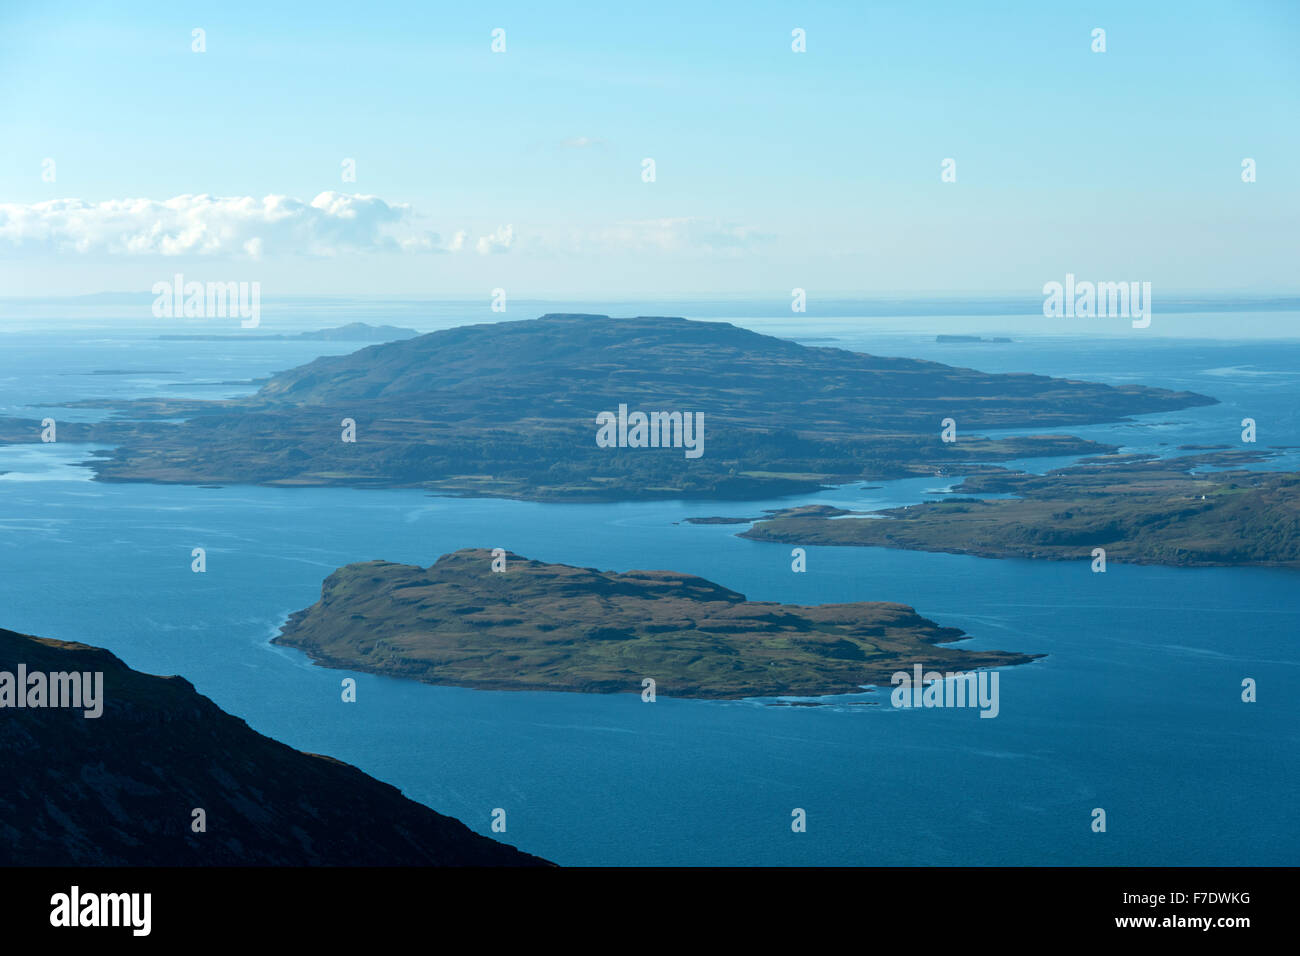 The islands of Eorsa (foreground) and Ulva over Loch na Keal, from Beinn nan Gabhar, Isle of Mull, Argyll and Bute, Scotland, UK Stock Photo